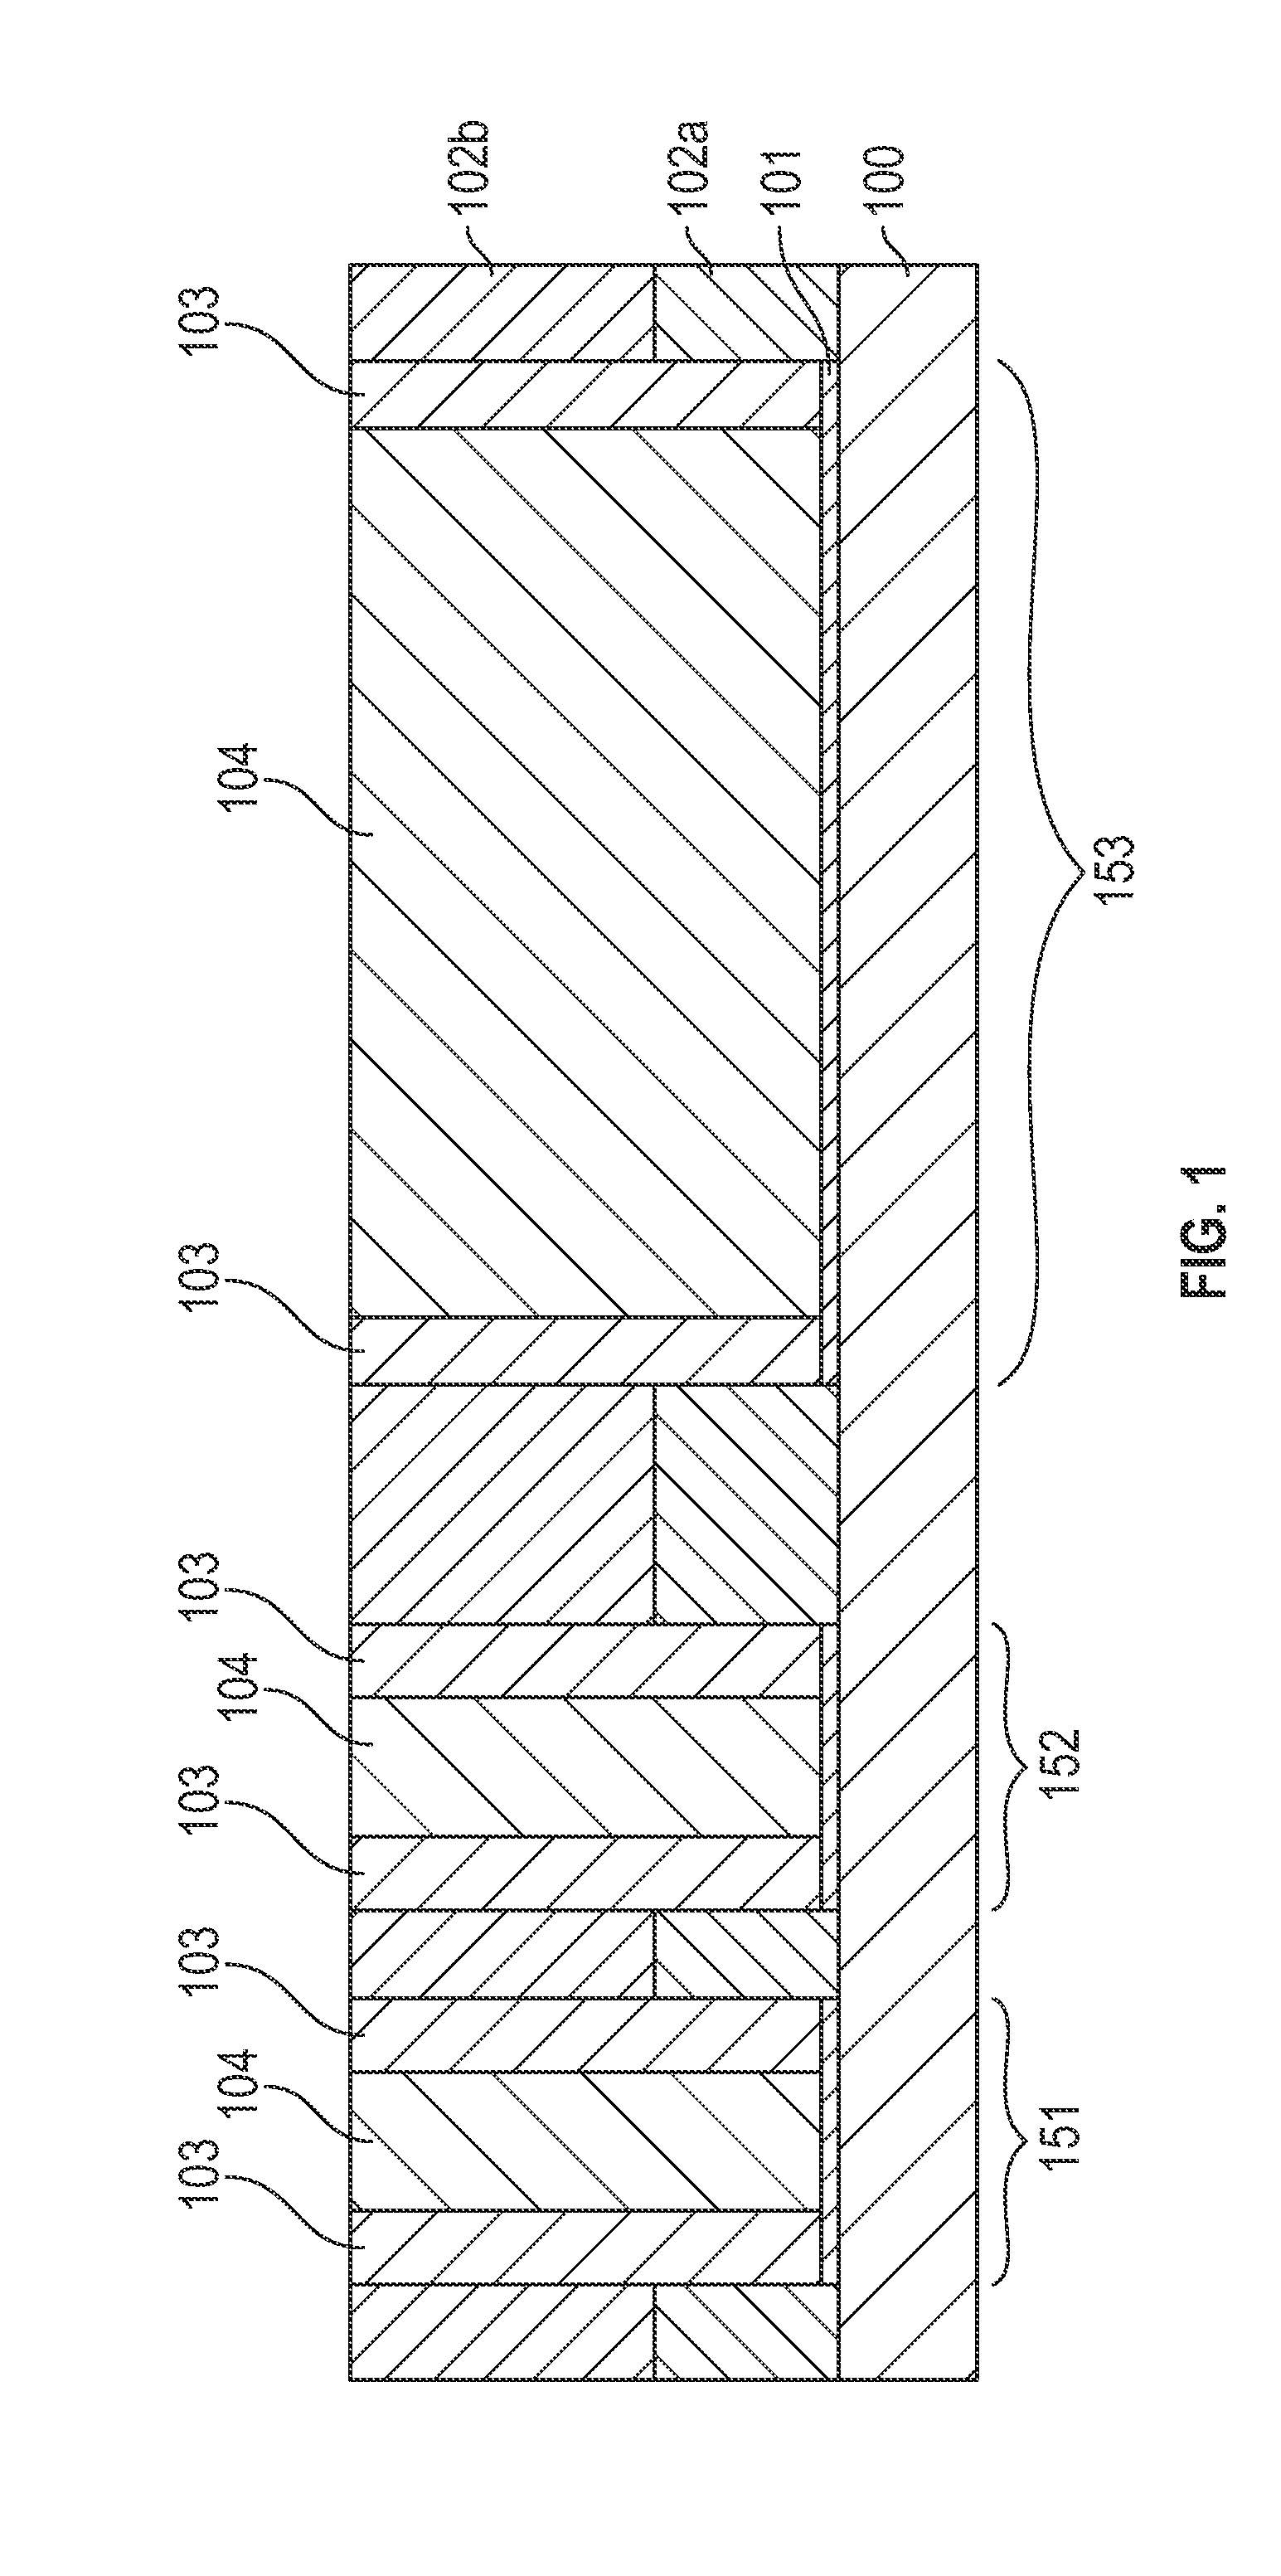 Integrated circuit and method for fabricating the same having a replacement gate structure